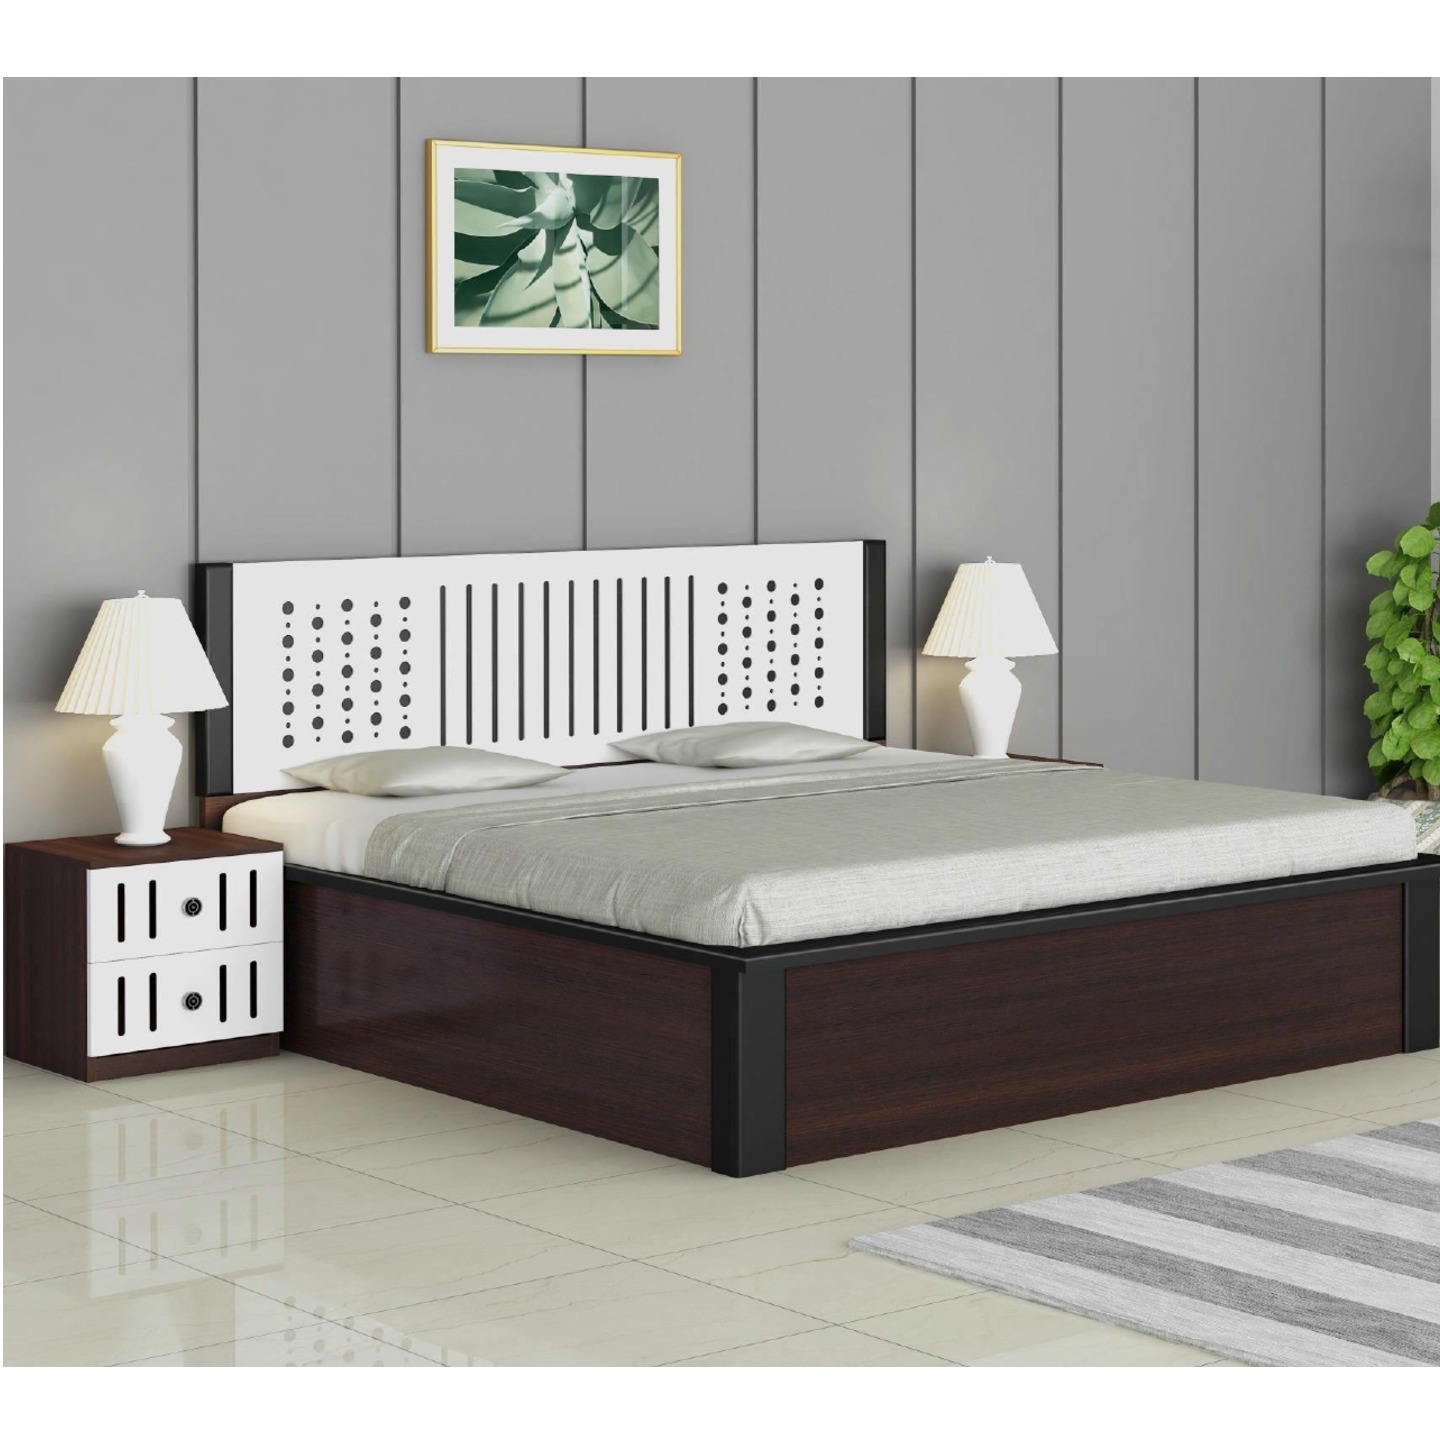 HS King Size Bed With Box Eritge In Dark Brown Colour